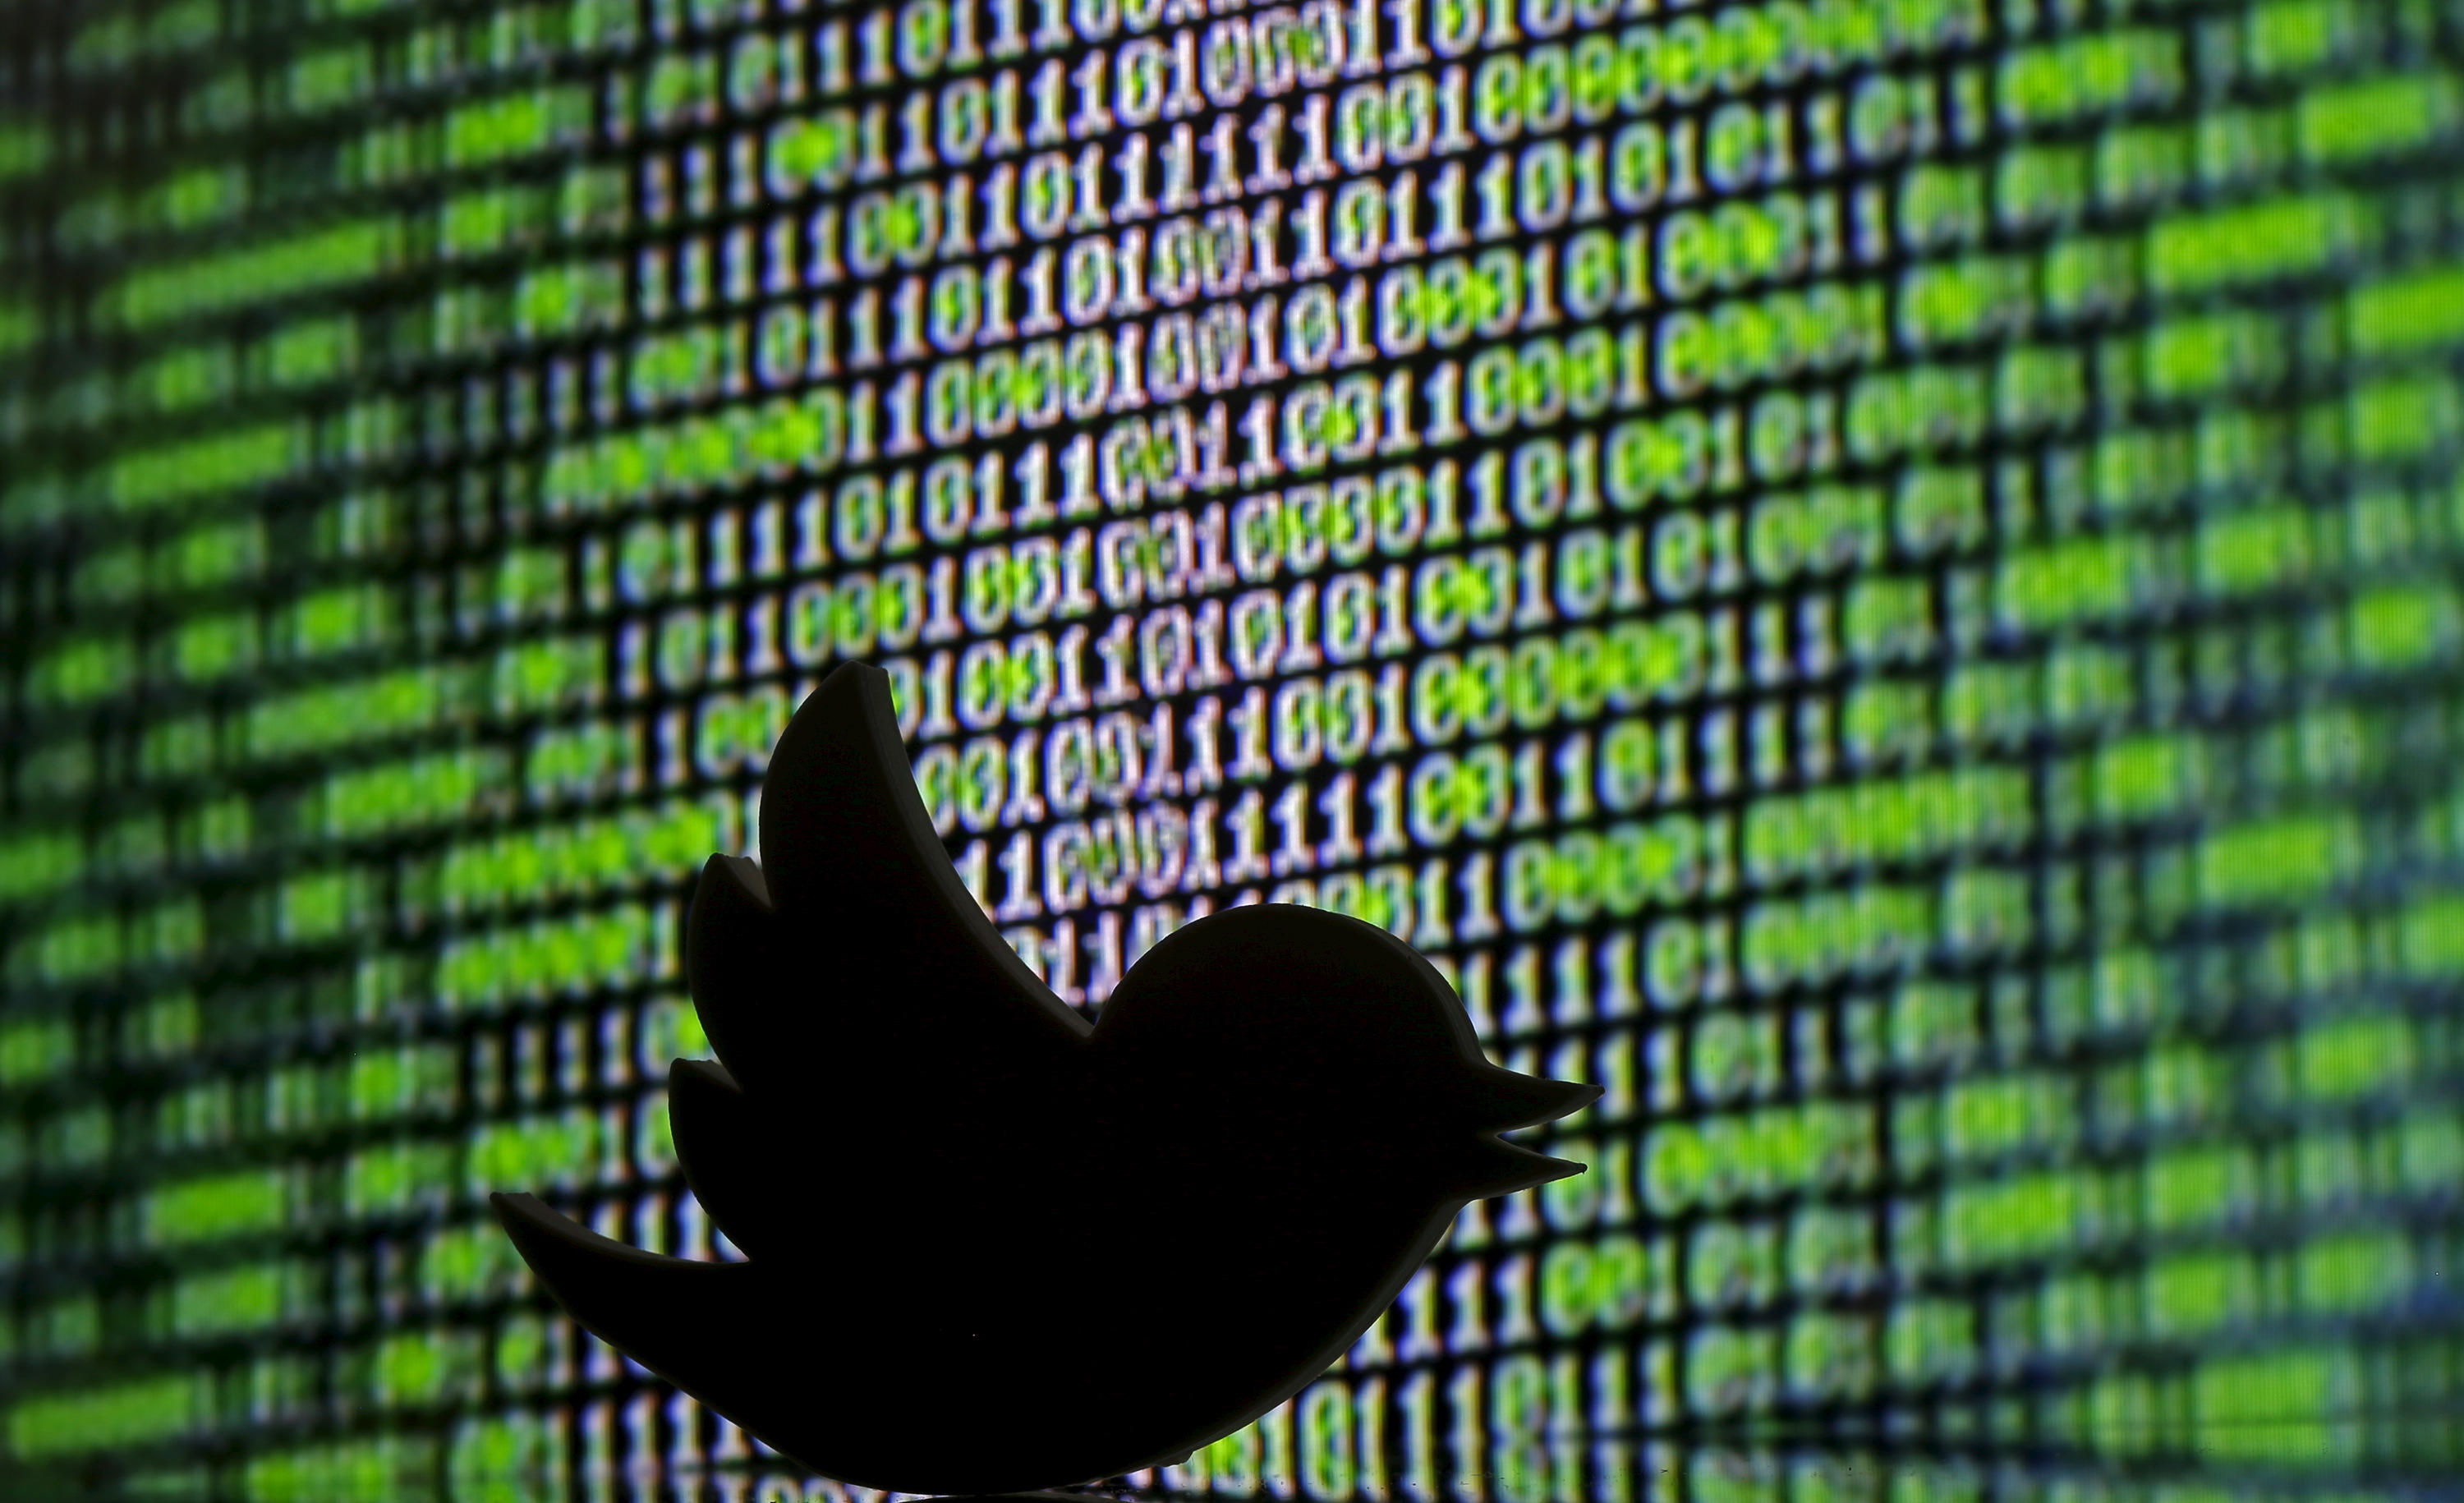 A 3-D-printed Twitter logo is seen in front of a displayed cyber code in this illustration taken March 22, 2016. (Reuters)